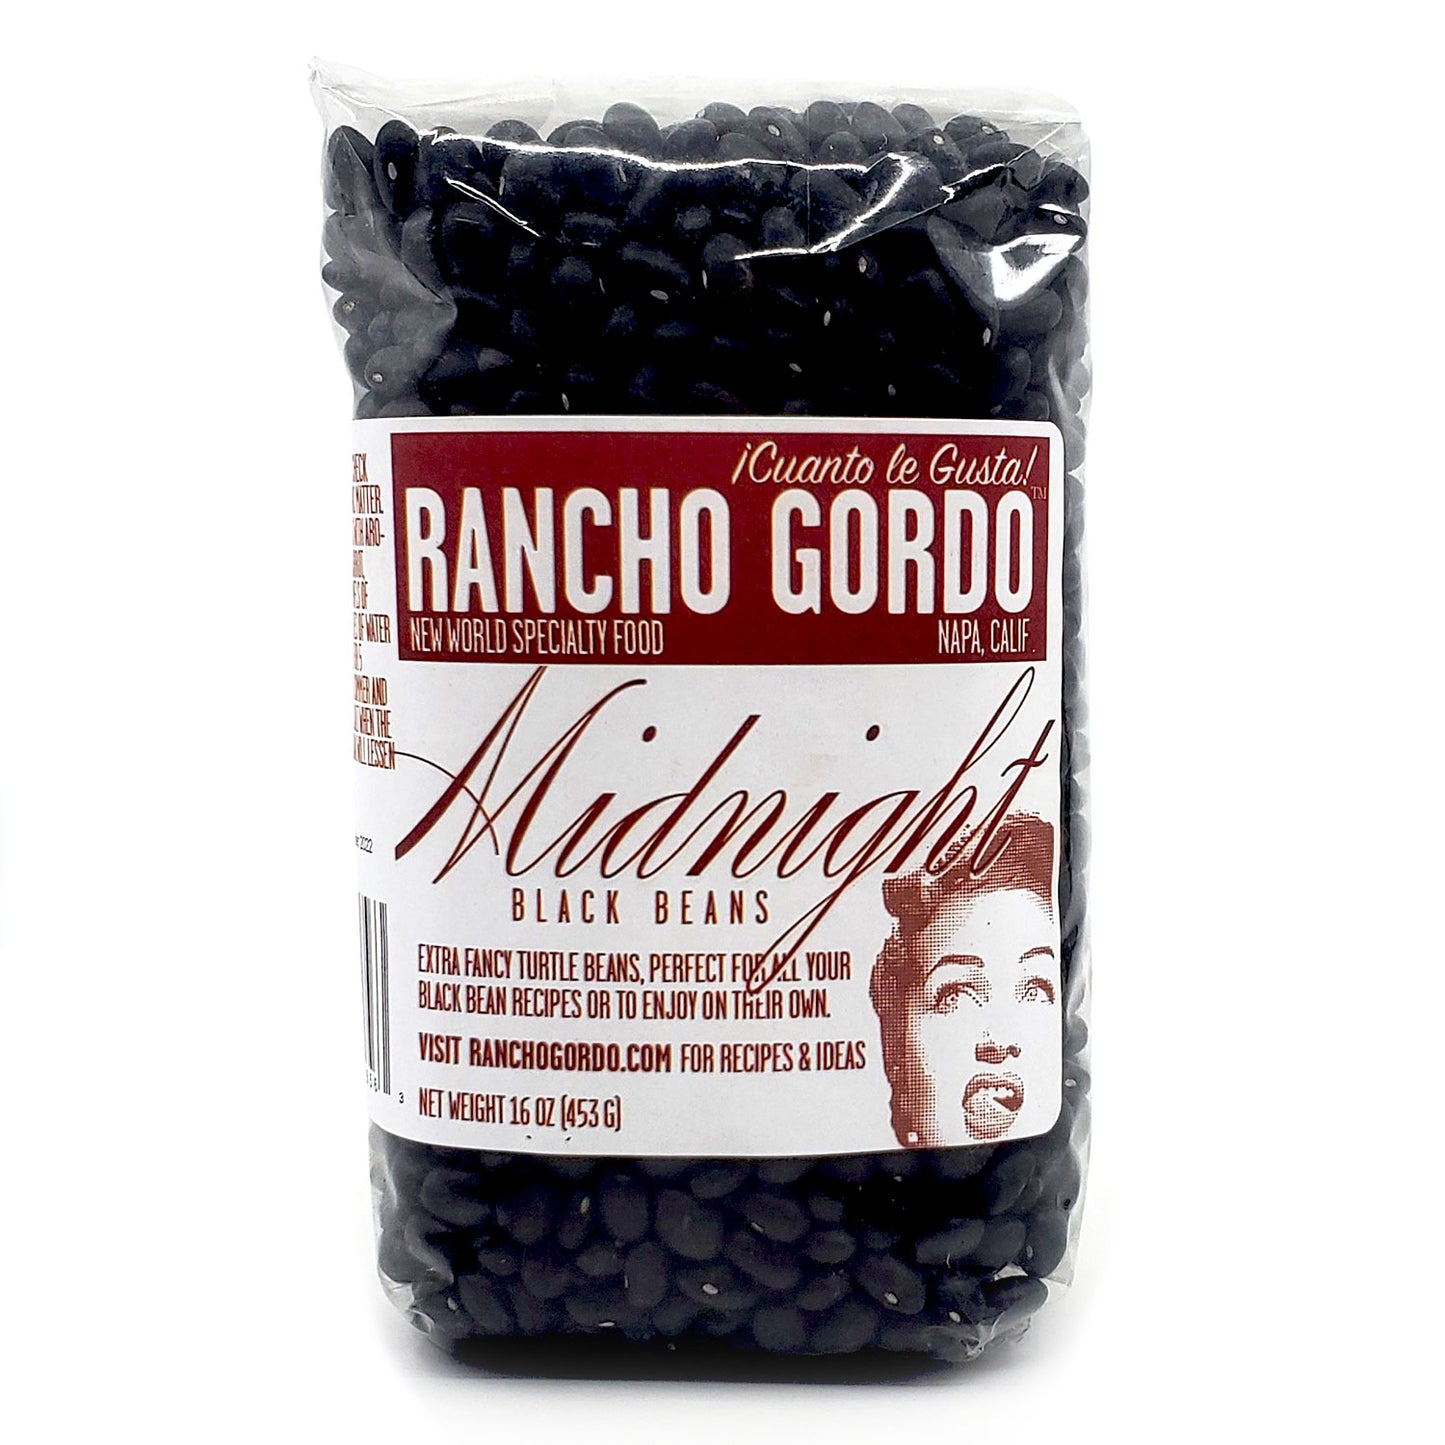 Load image into Gallery viewer, Rancho gordo midnight black beans. Perfect for all bean recipes or to enjoy on their own. heirloom beans.
